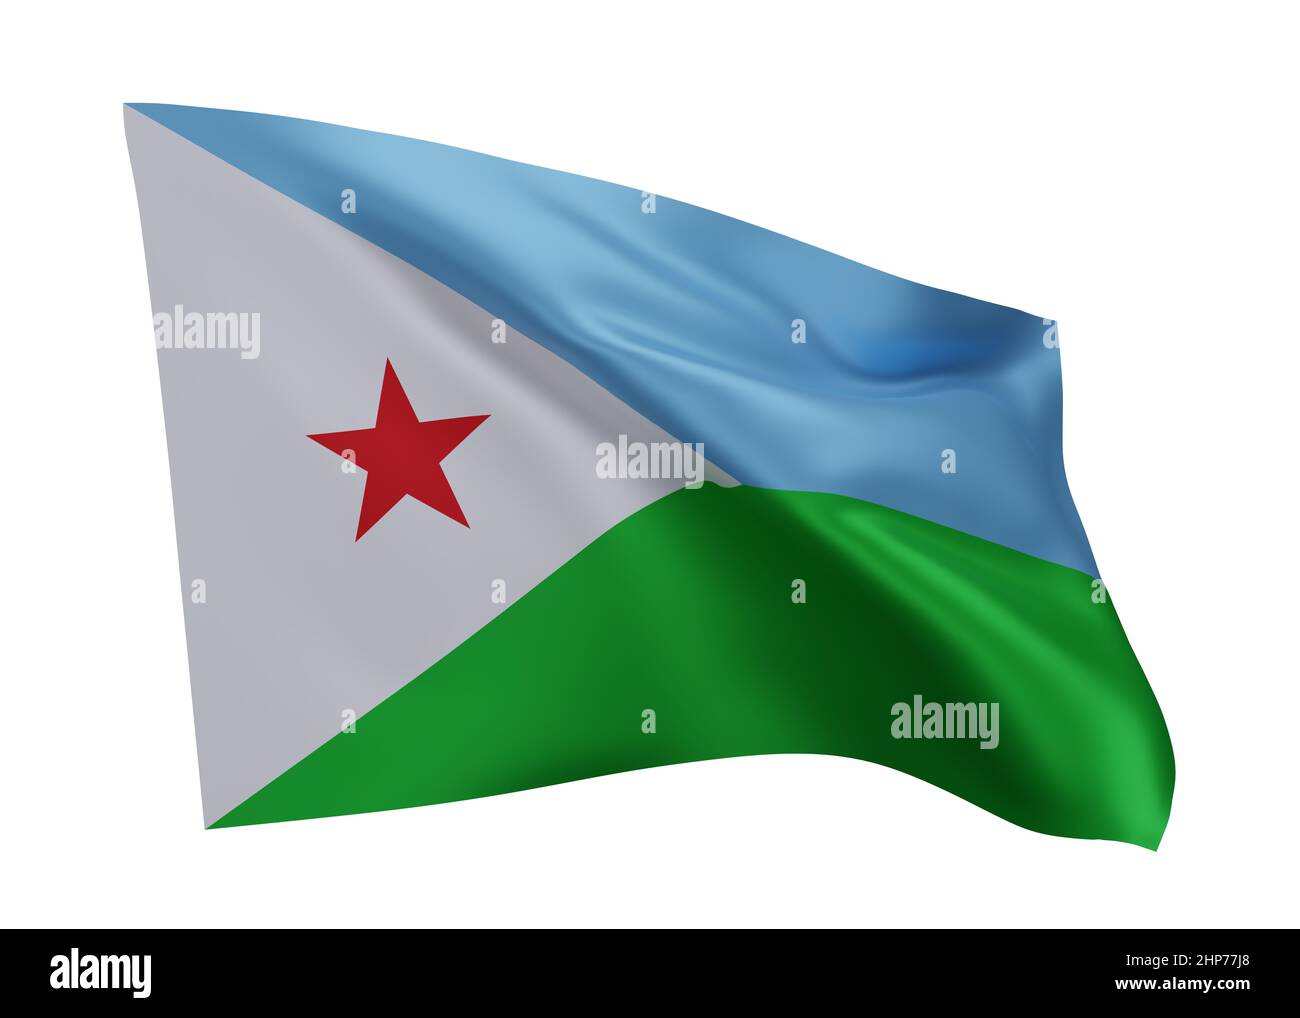 3d illustration flag of Djibouti. Djiboutian high resolution flag isolated against white background. 3d rendering Stock Photo